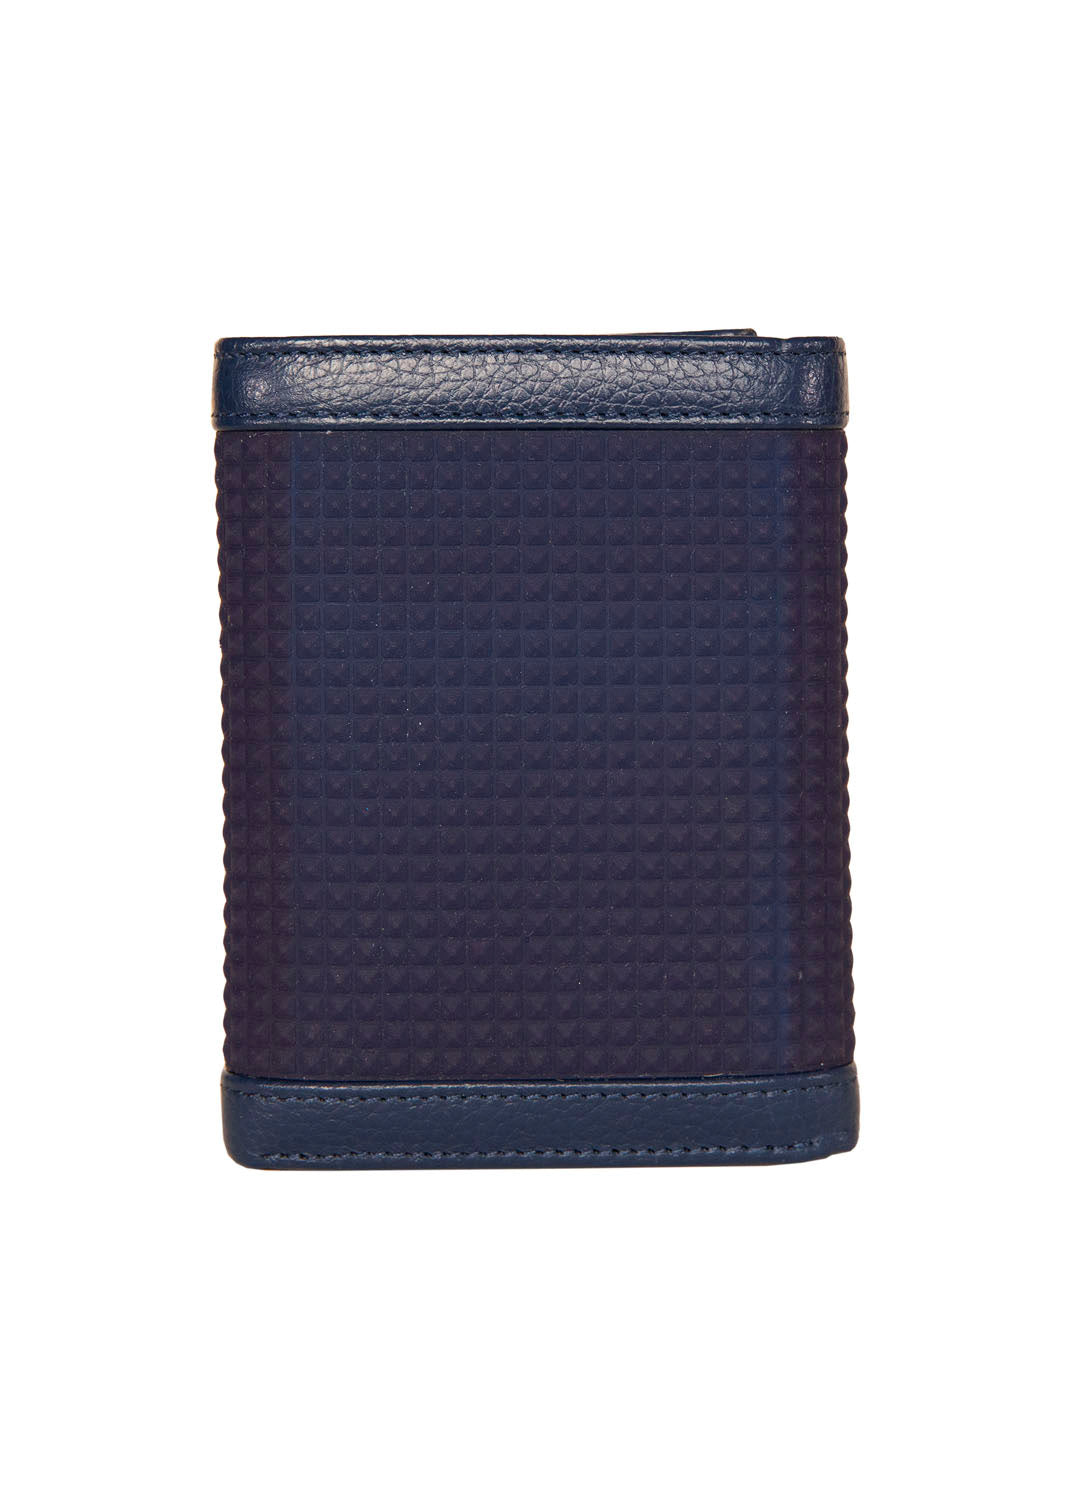 NAUTICA LOGO RUBBER / LEATHER TRIFOLD WALLET